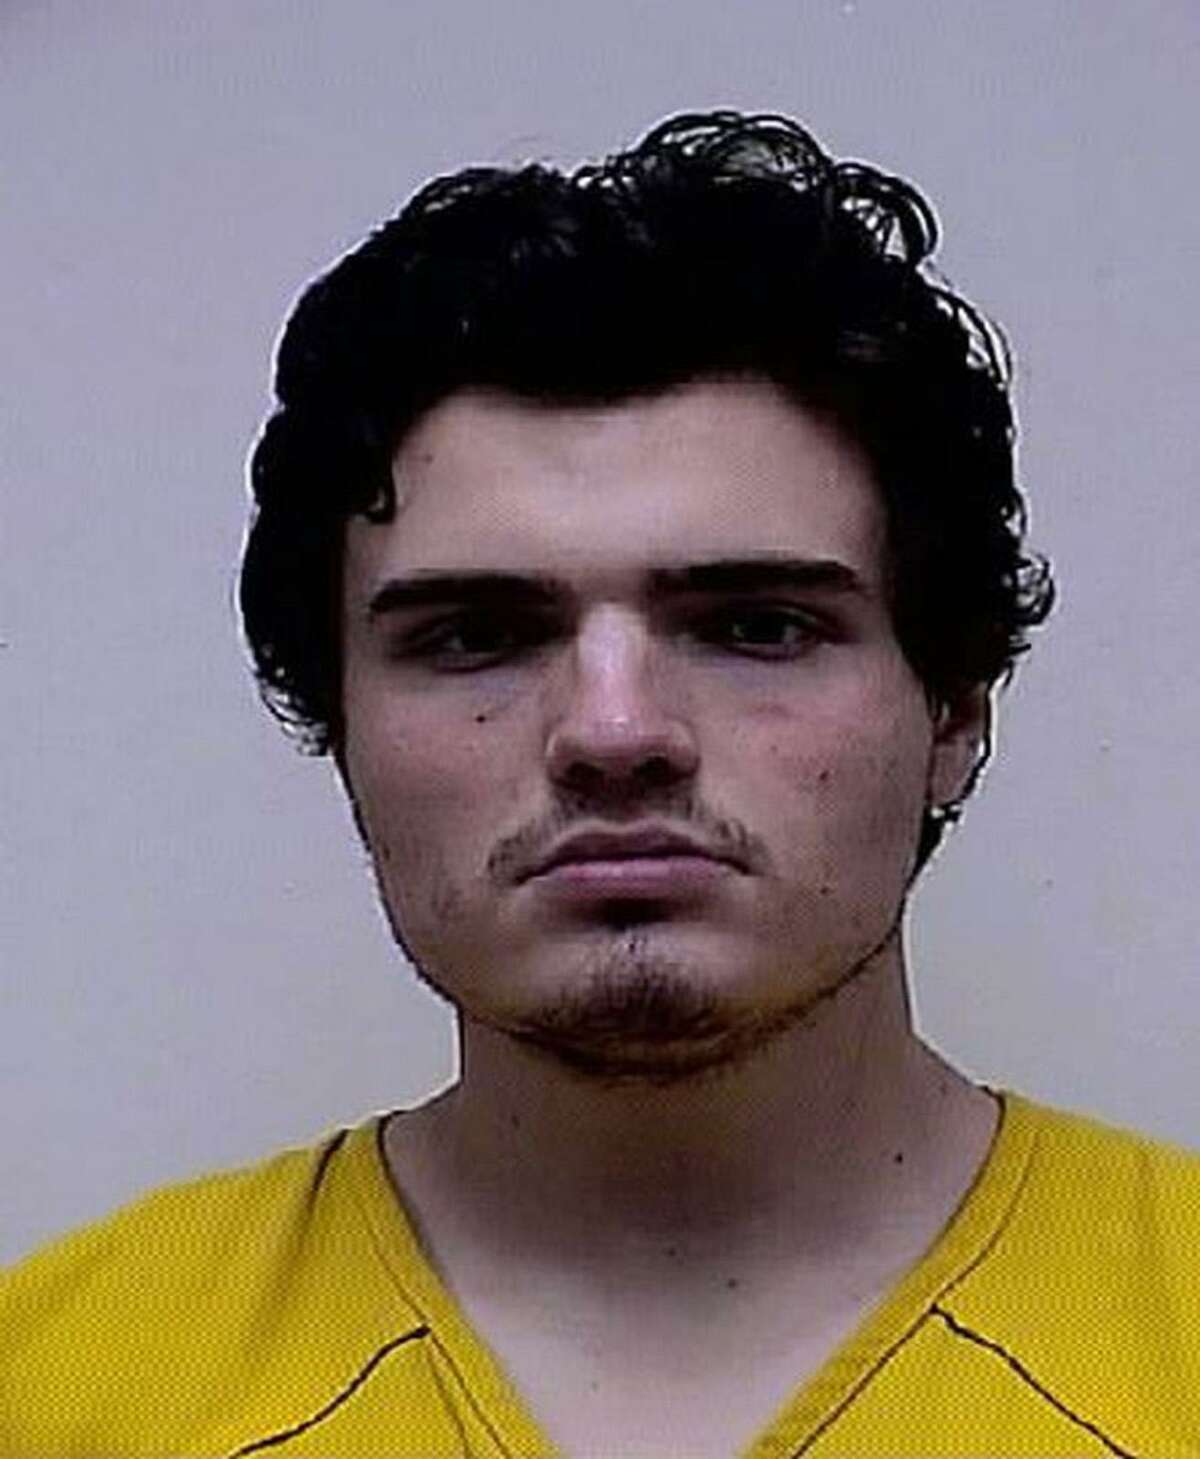 Peter Manfredonia, suspected of two homicides, a home invasion and a kidnapping in Connecticut, was taken into custody in Maryland. (Washington County Sheriff's Office/TNS)